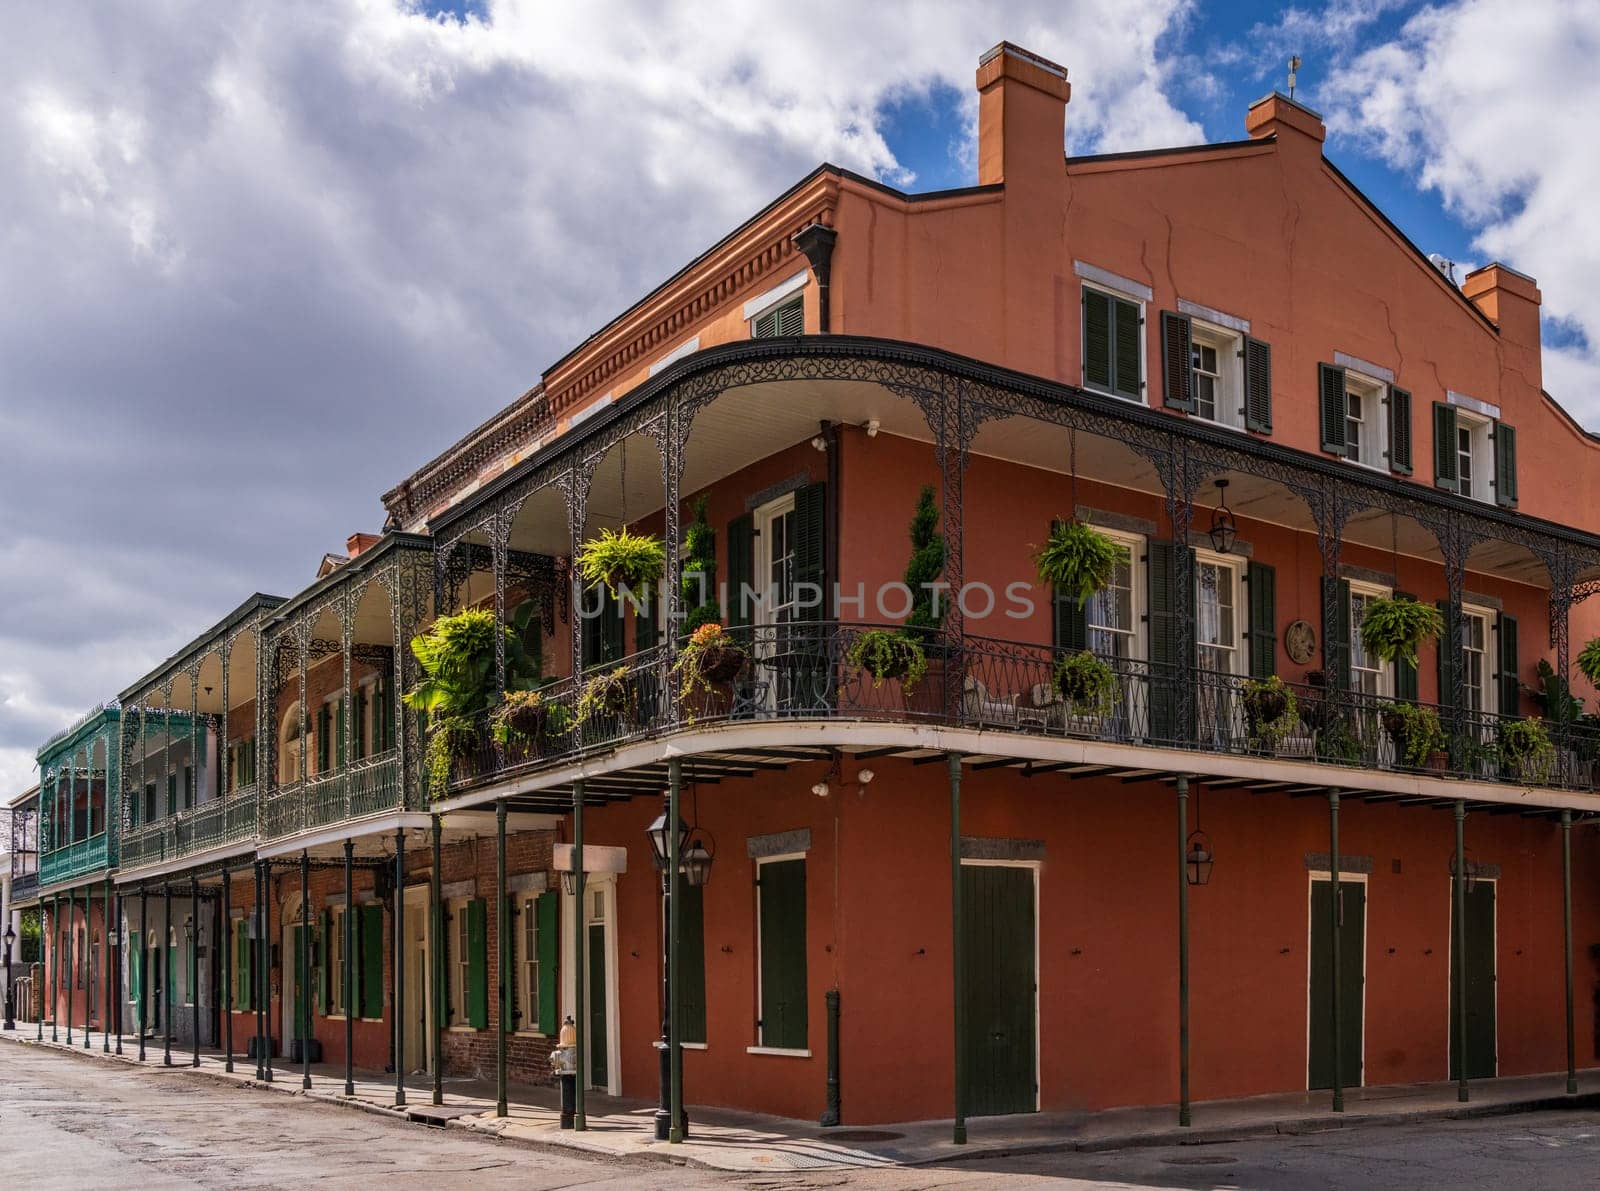 Traditional wrought iron balcony on ochre New Orleans house by steheap